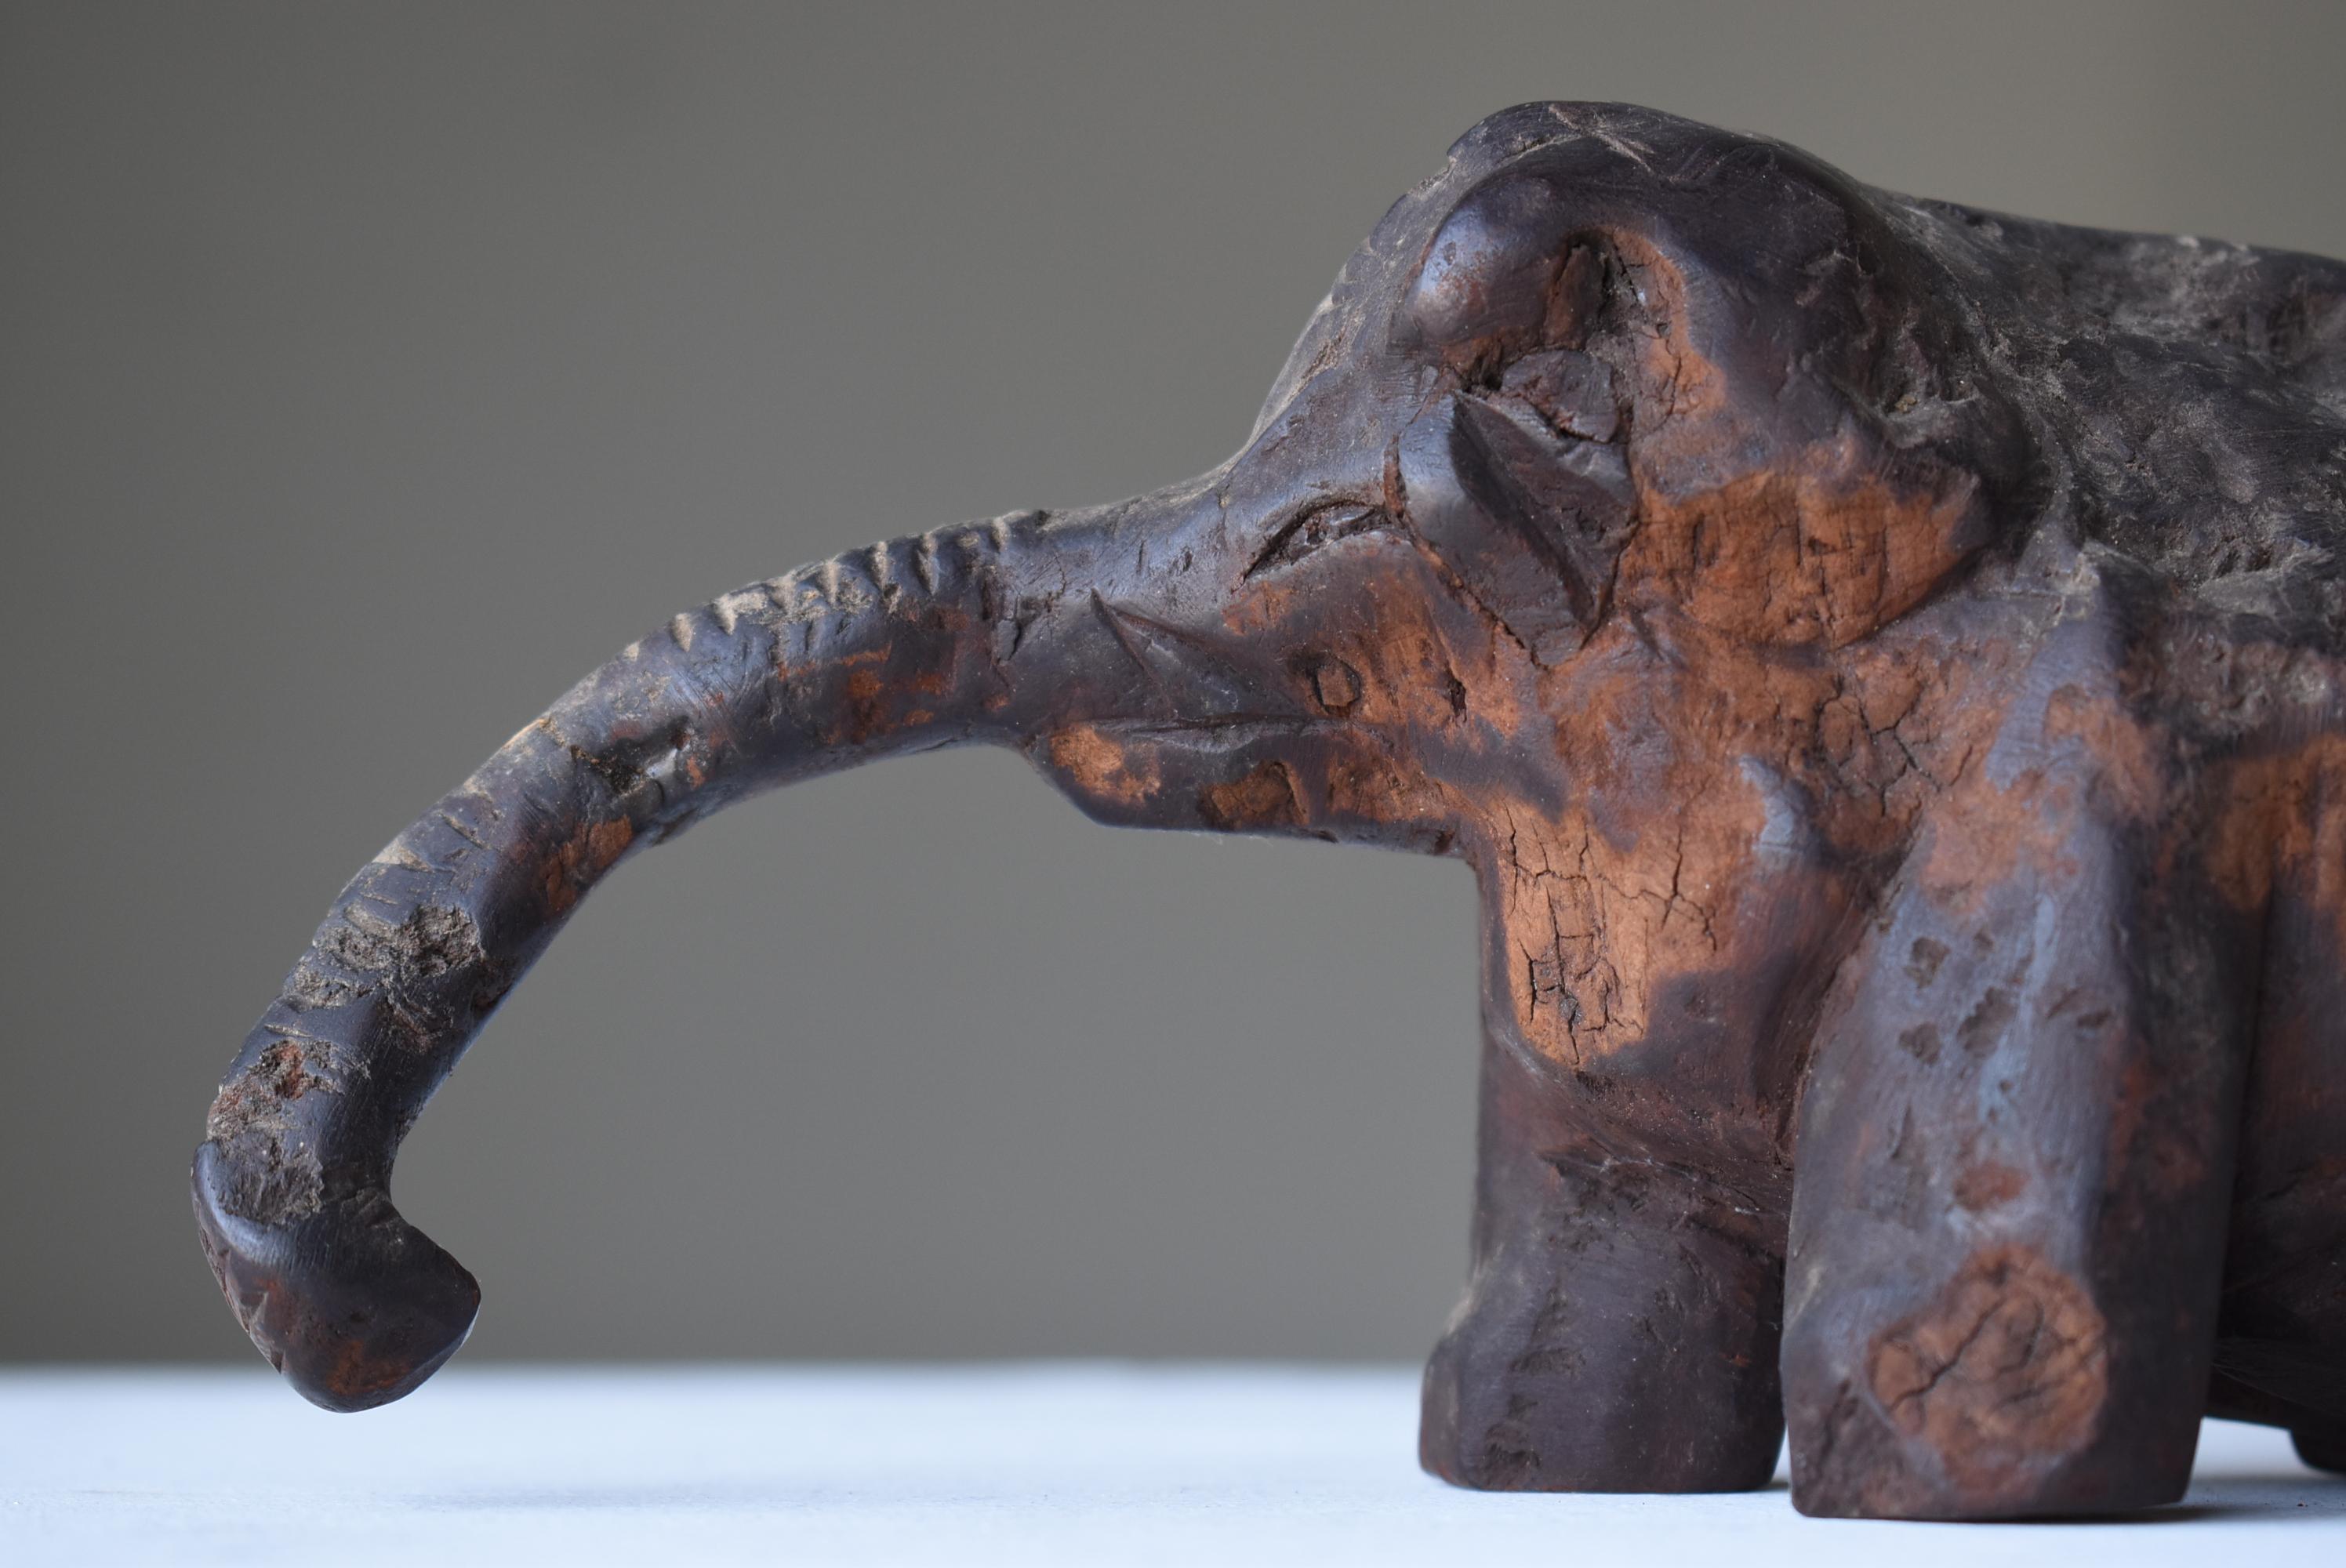 20th Century Japanese Antique Wood Carving Elephant 1860s-1920s / Wabi Sabi Sculpture Object For Sale